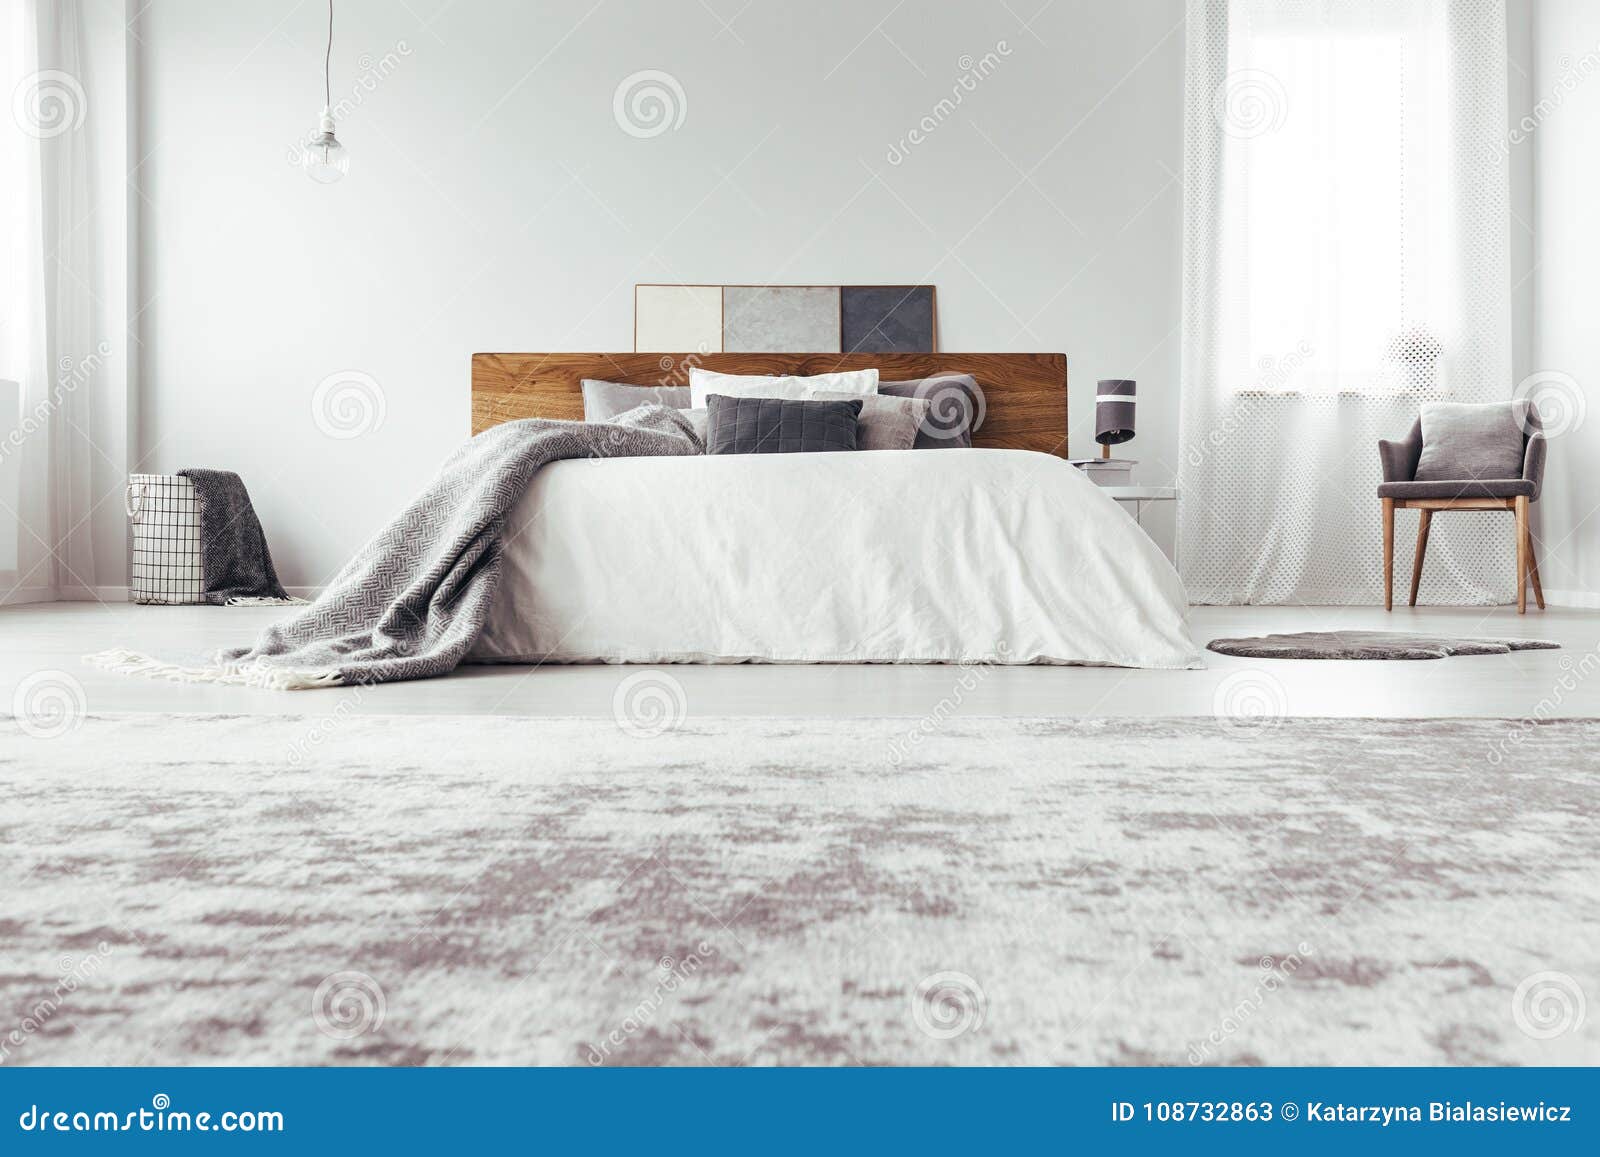 low angle of bedroom interior